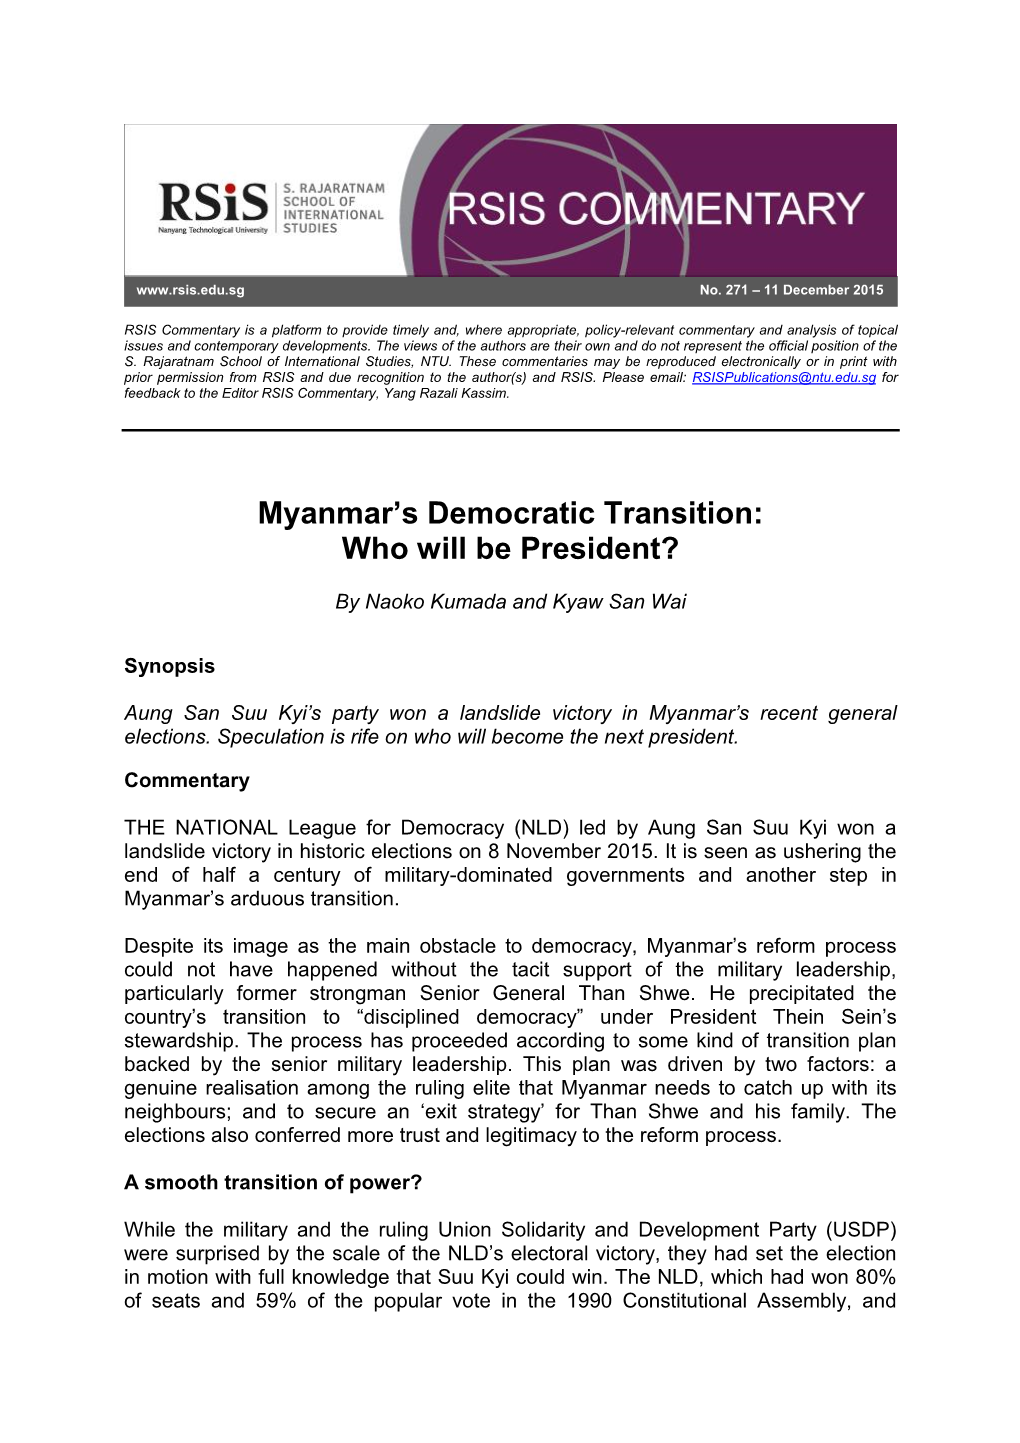 Myanmar's Democratic Transition: Who Will Be President?